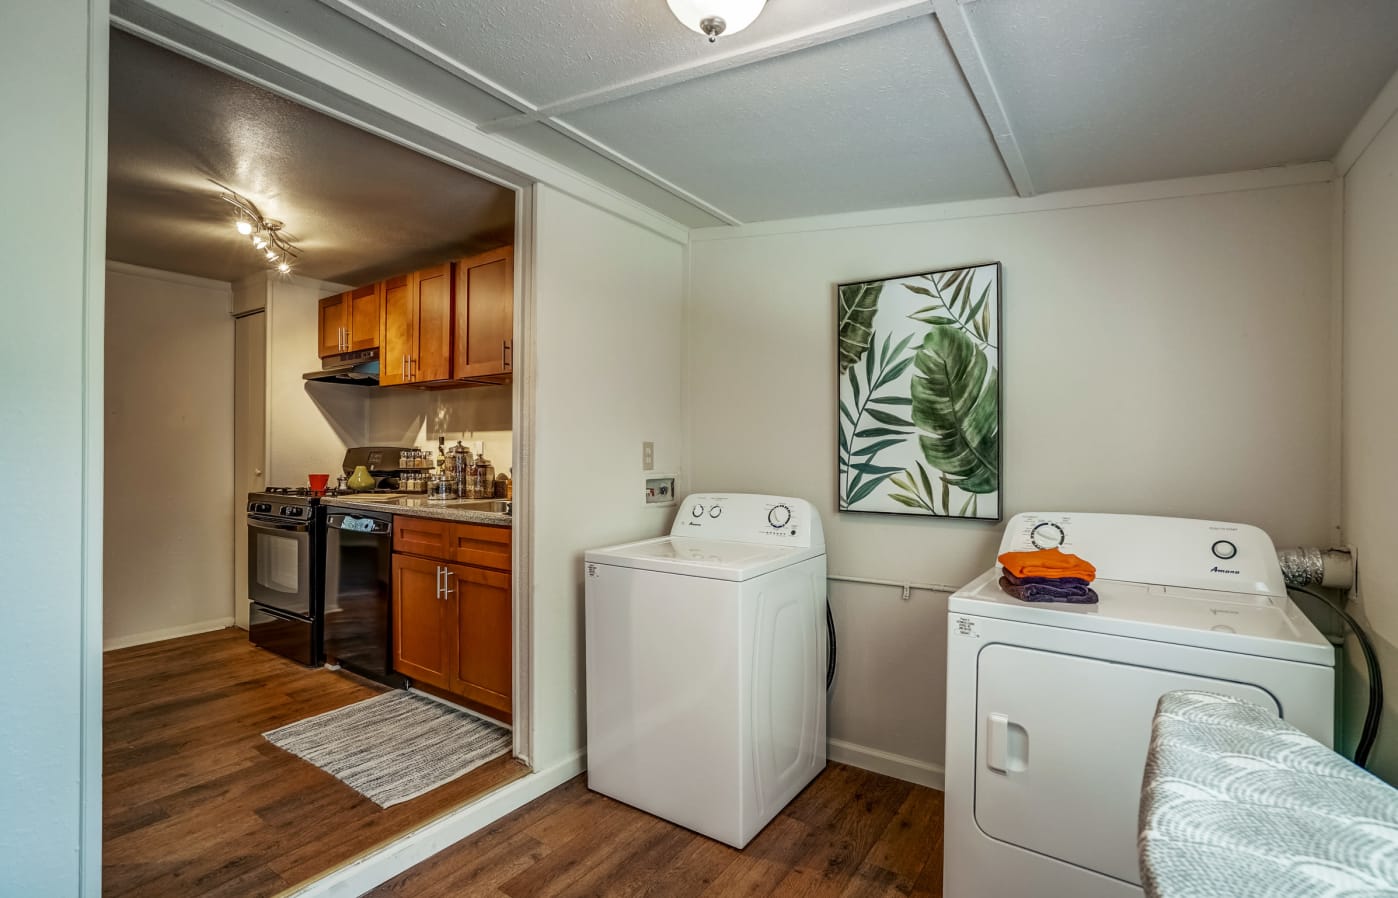 Full-sized washer and dryer in a separate area next to the kitchen